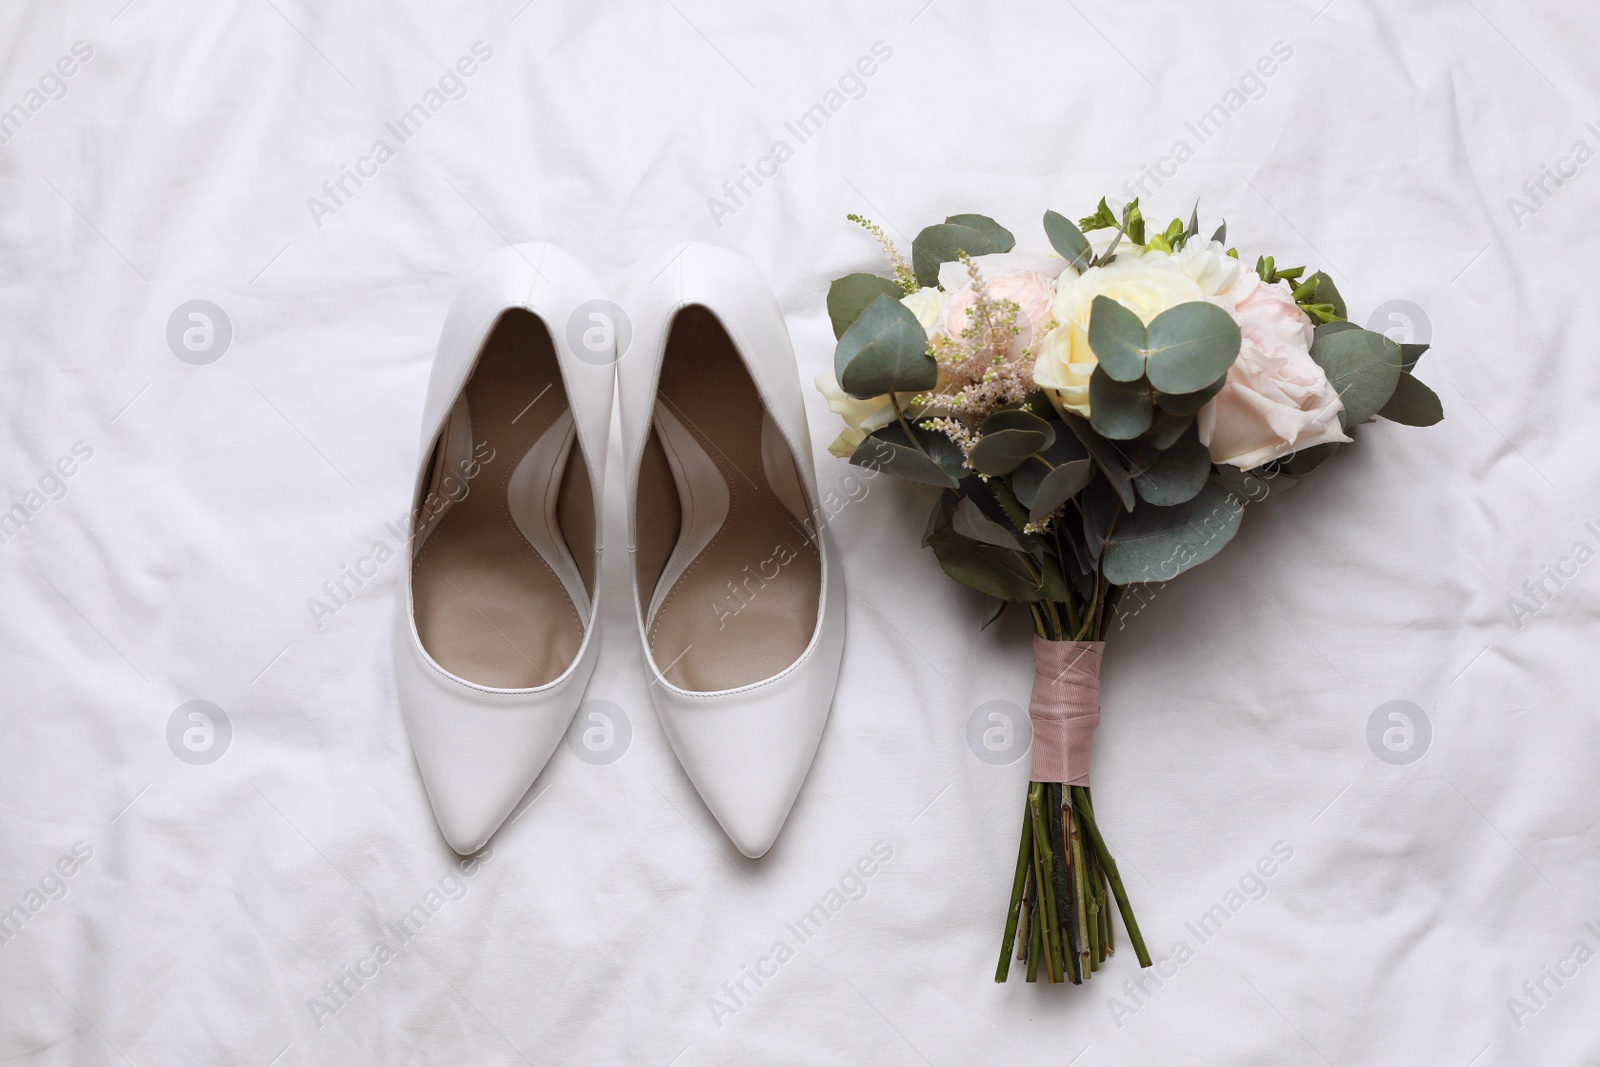 Photo of Pair of wedding high heel shoes and beautiful bouquet on white fabric, flat lay